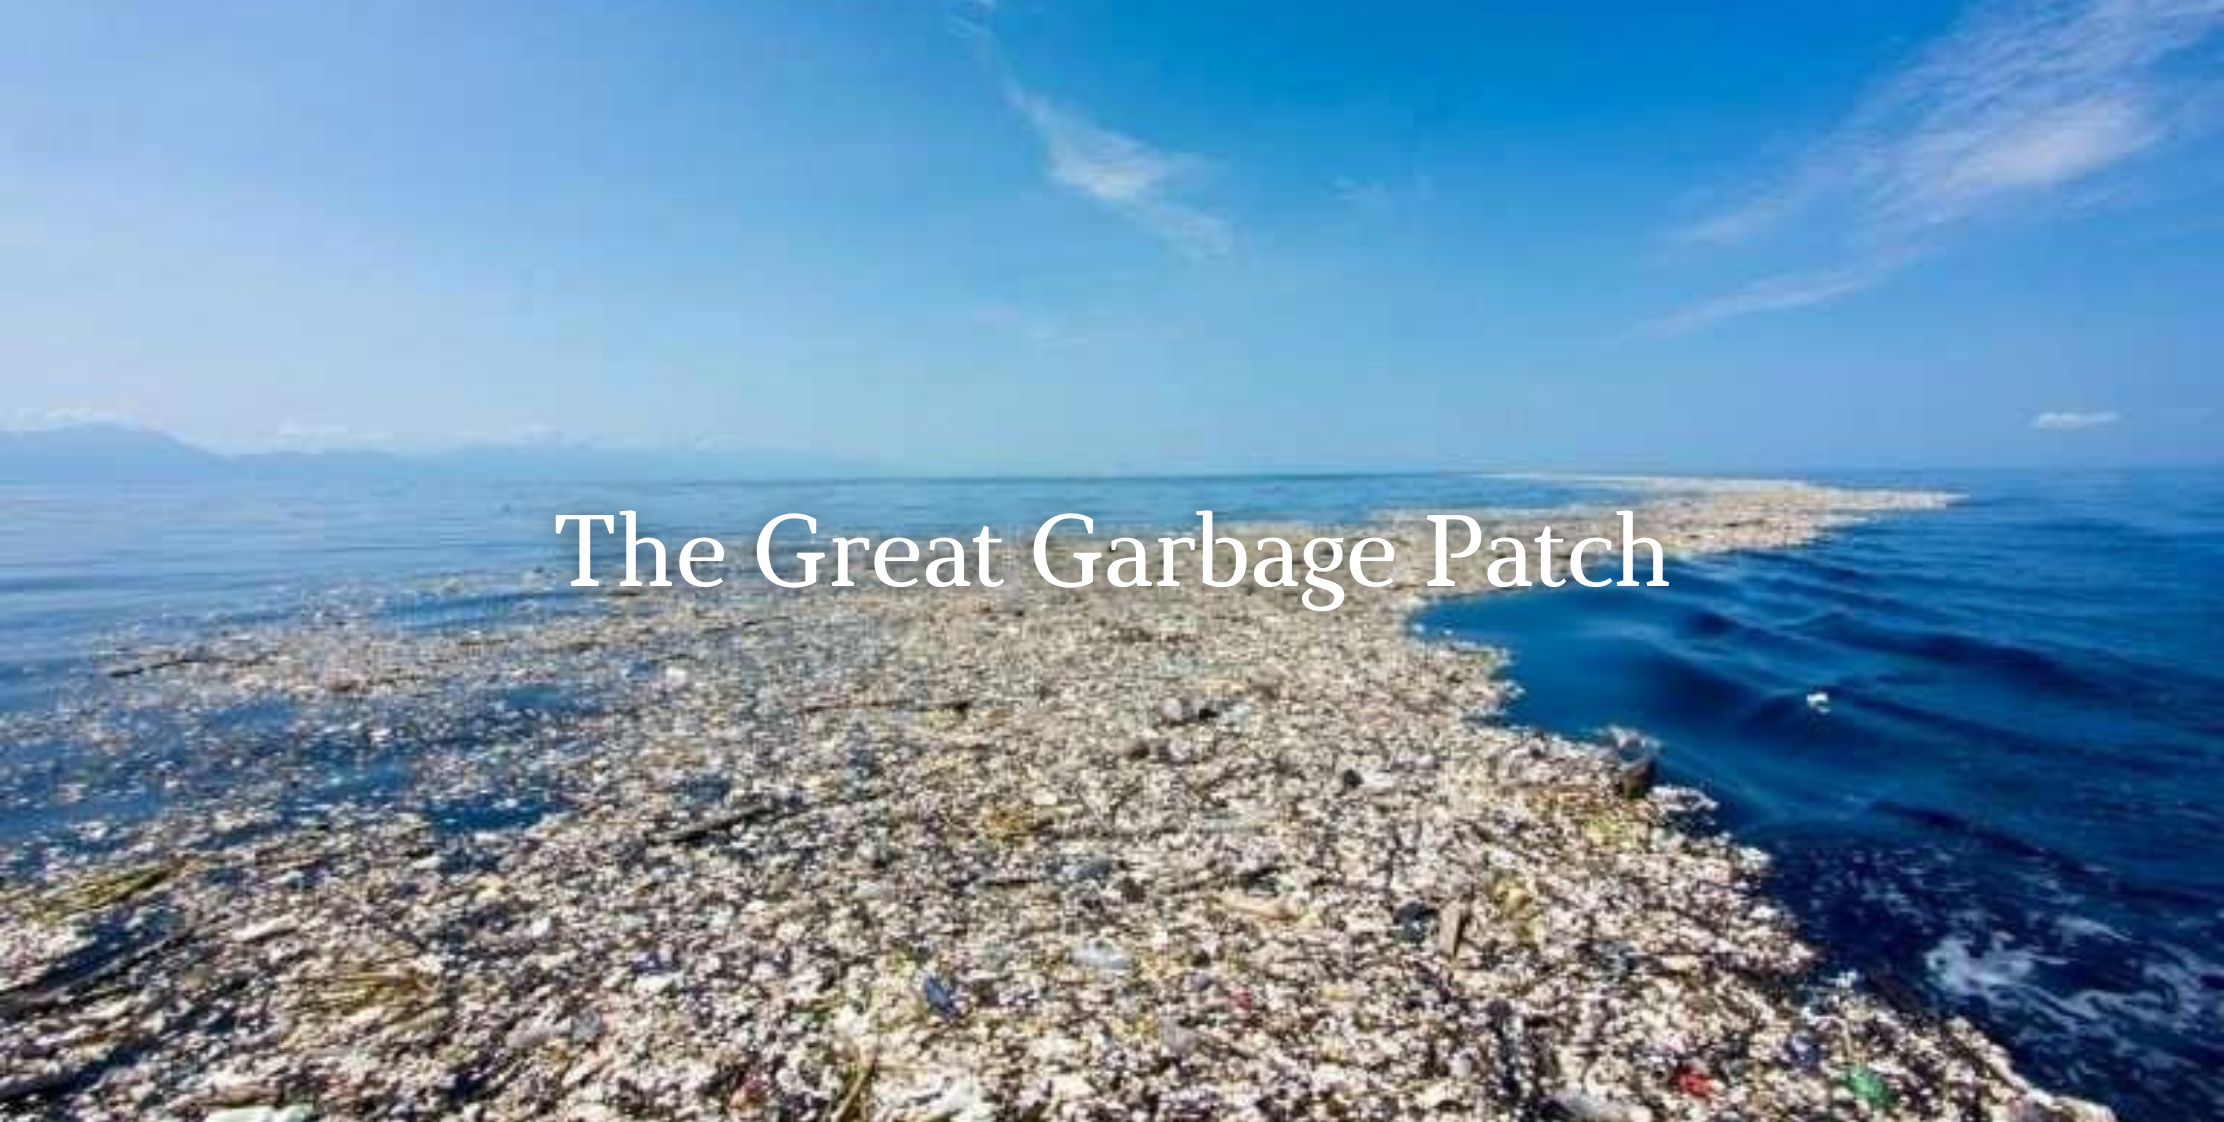 The Great Garbage Patch